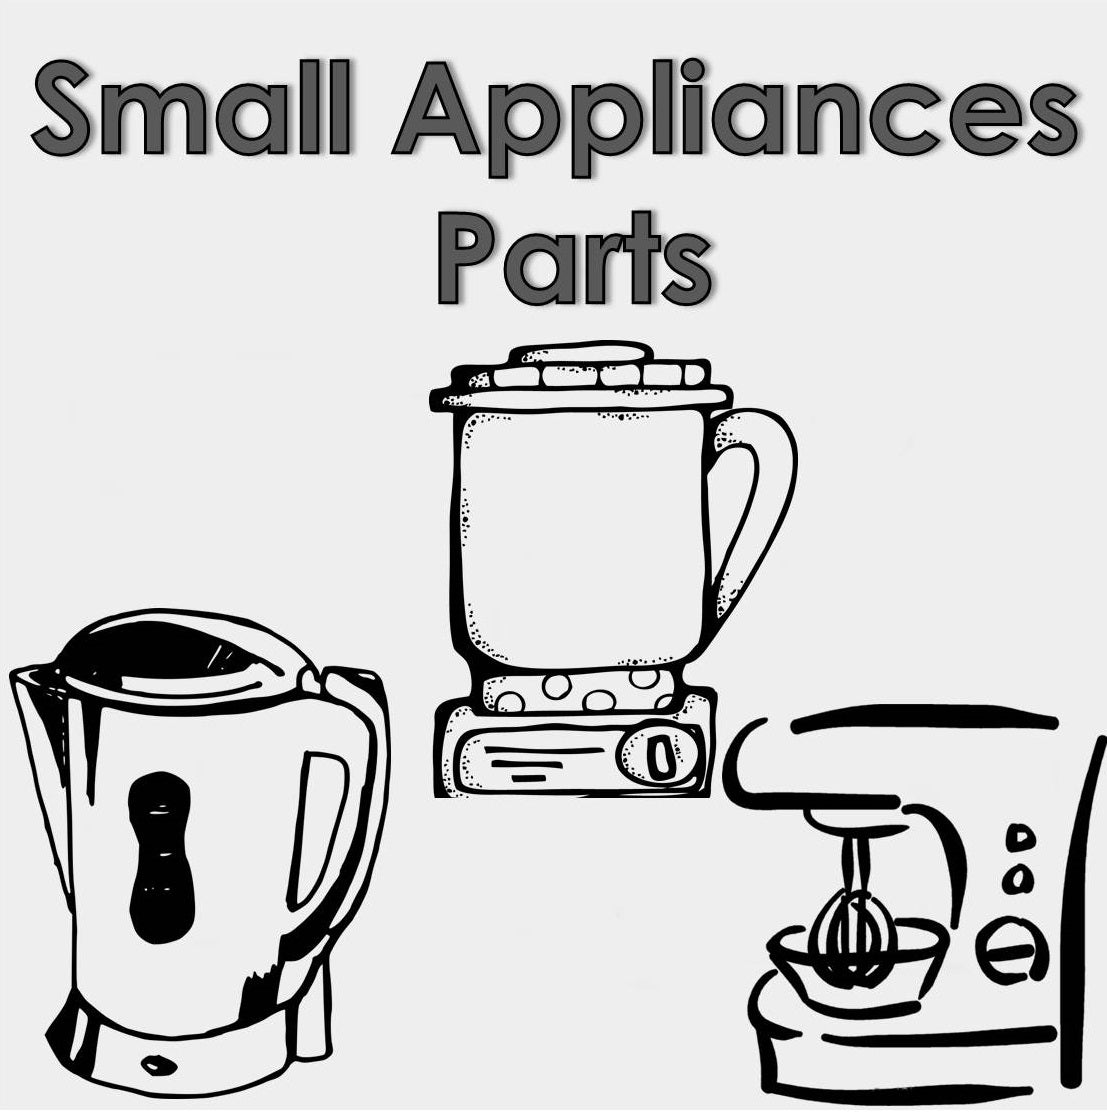 Small Appliances Parts – Express Parts Direct